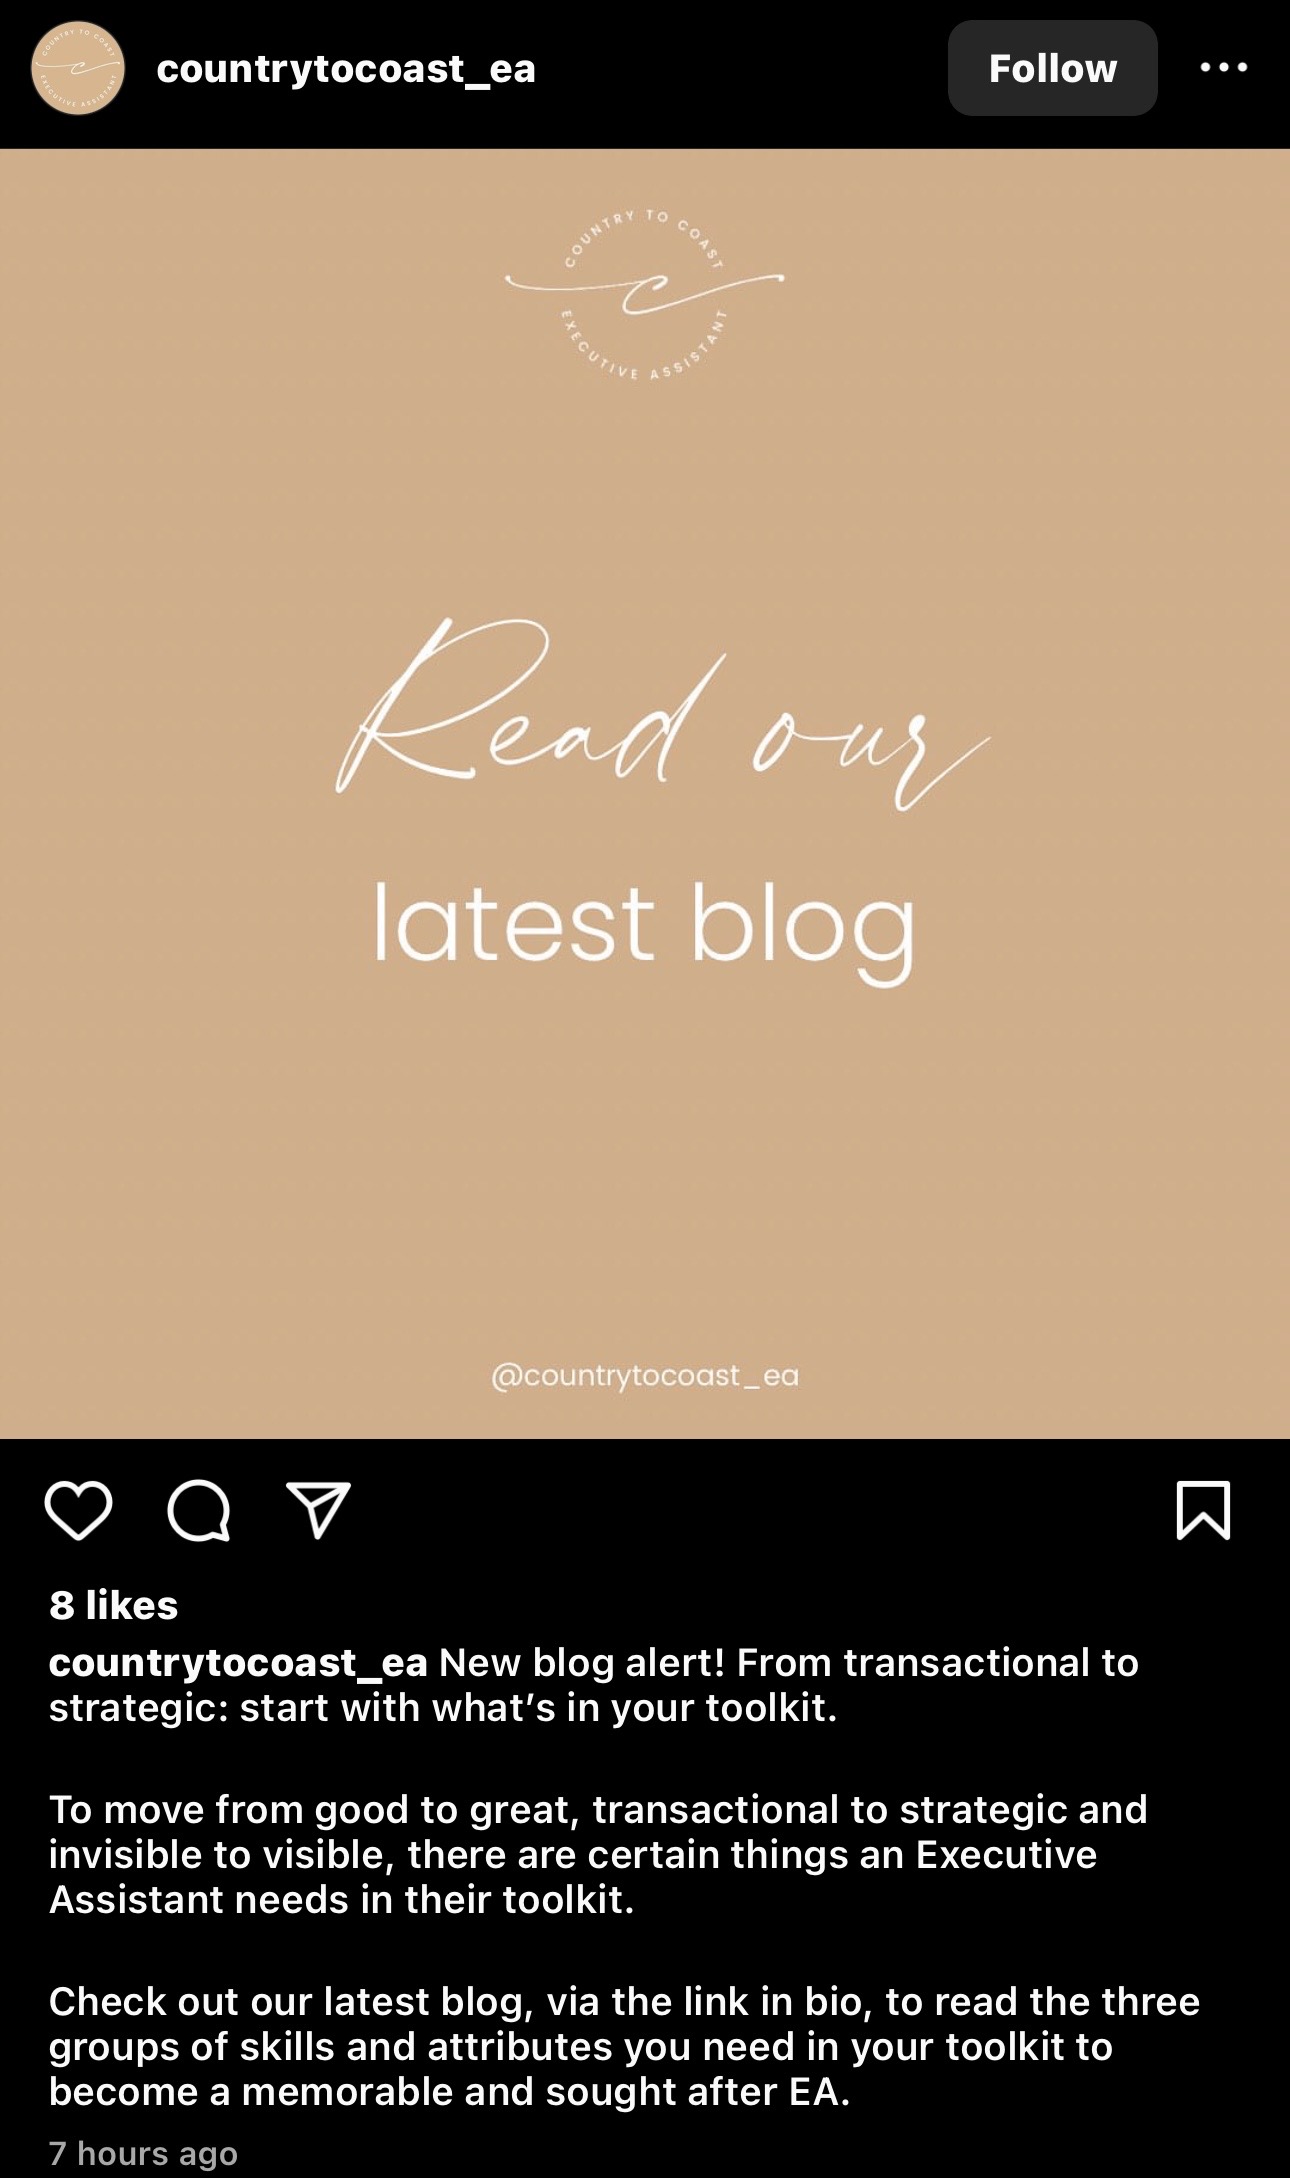 A social media image promoting a latest blog post